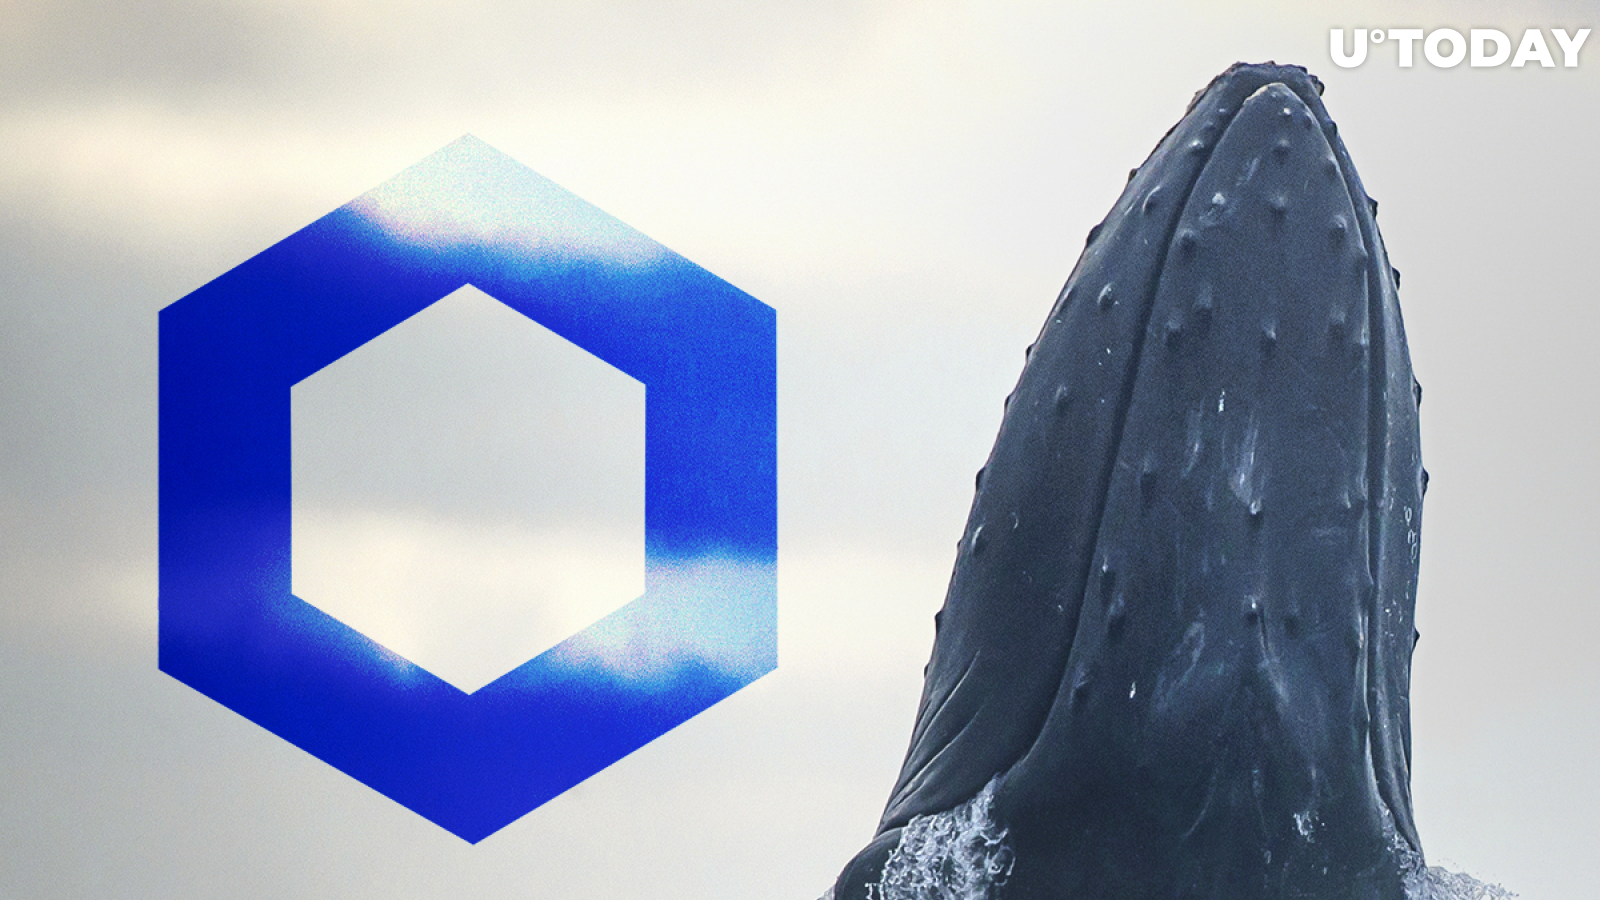 Chainlink Whales Now Hold $431 Million in LINK, Having Bought Dip: Details